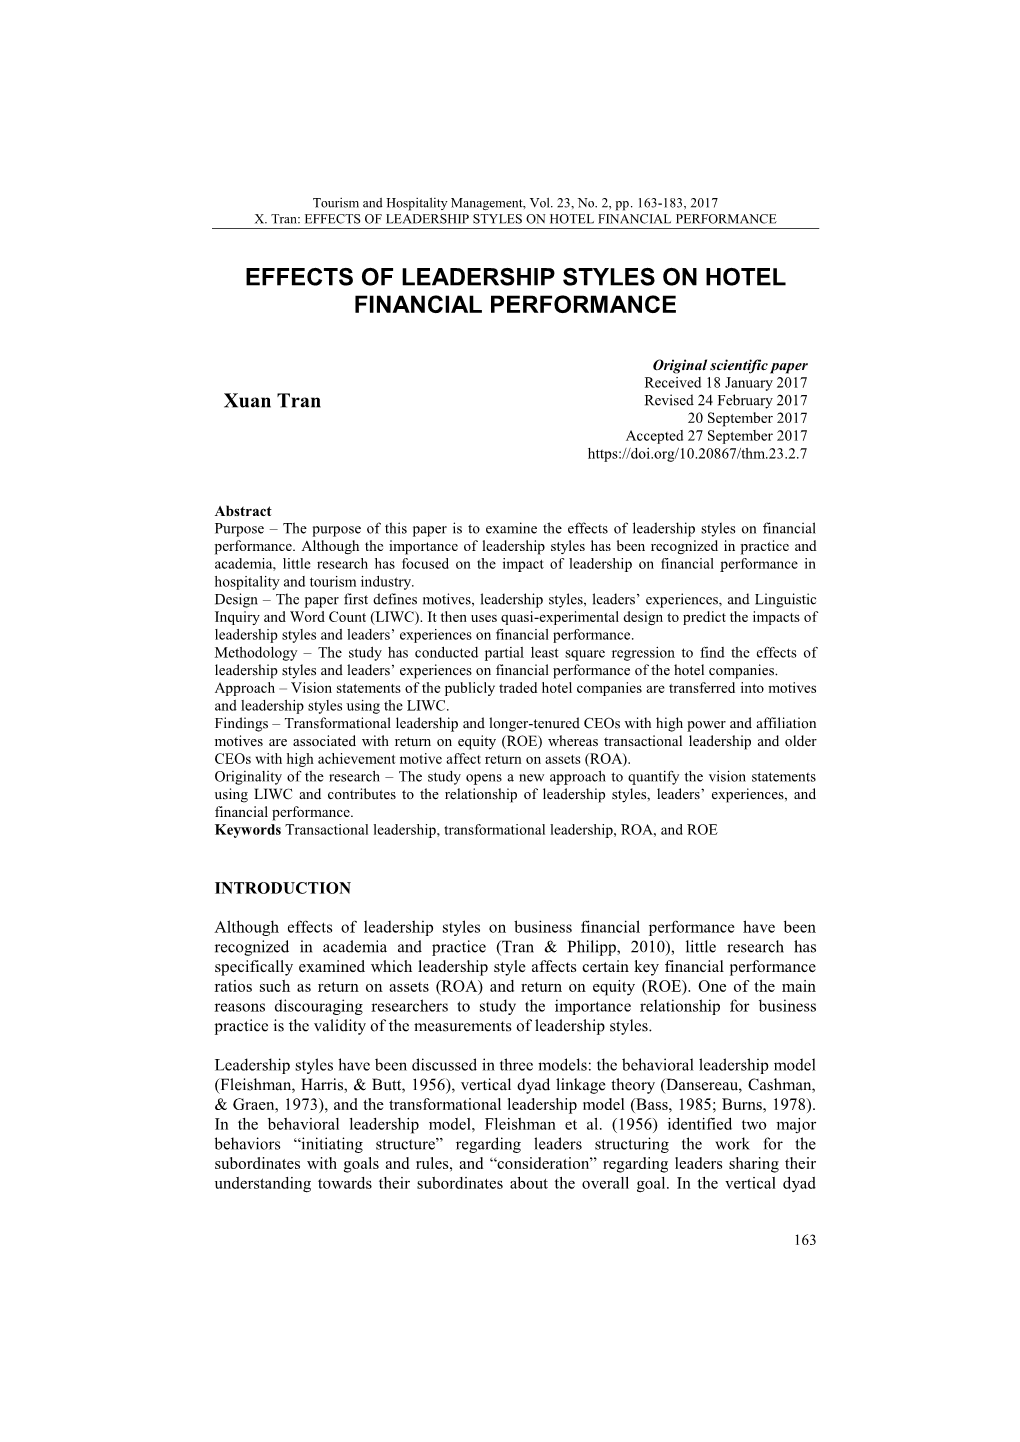 Effects of Leadership Styles on Hotel Financial Performance